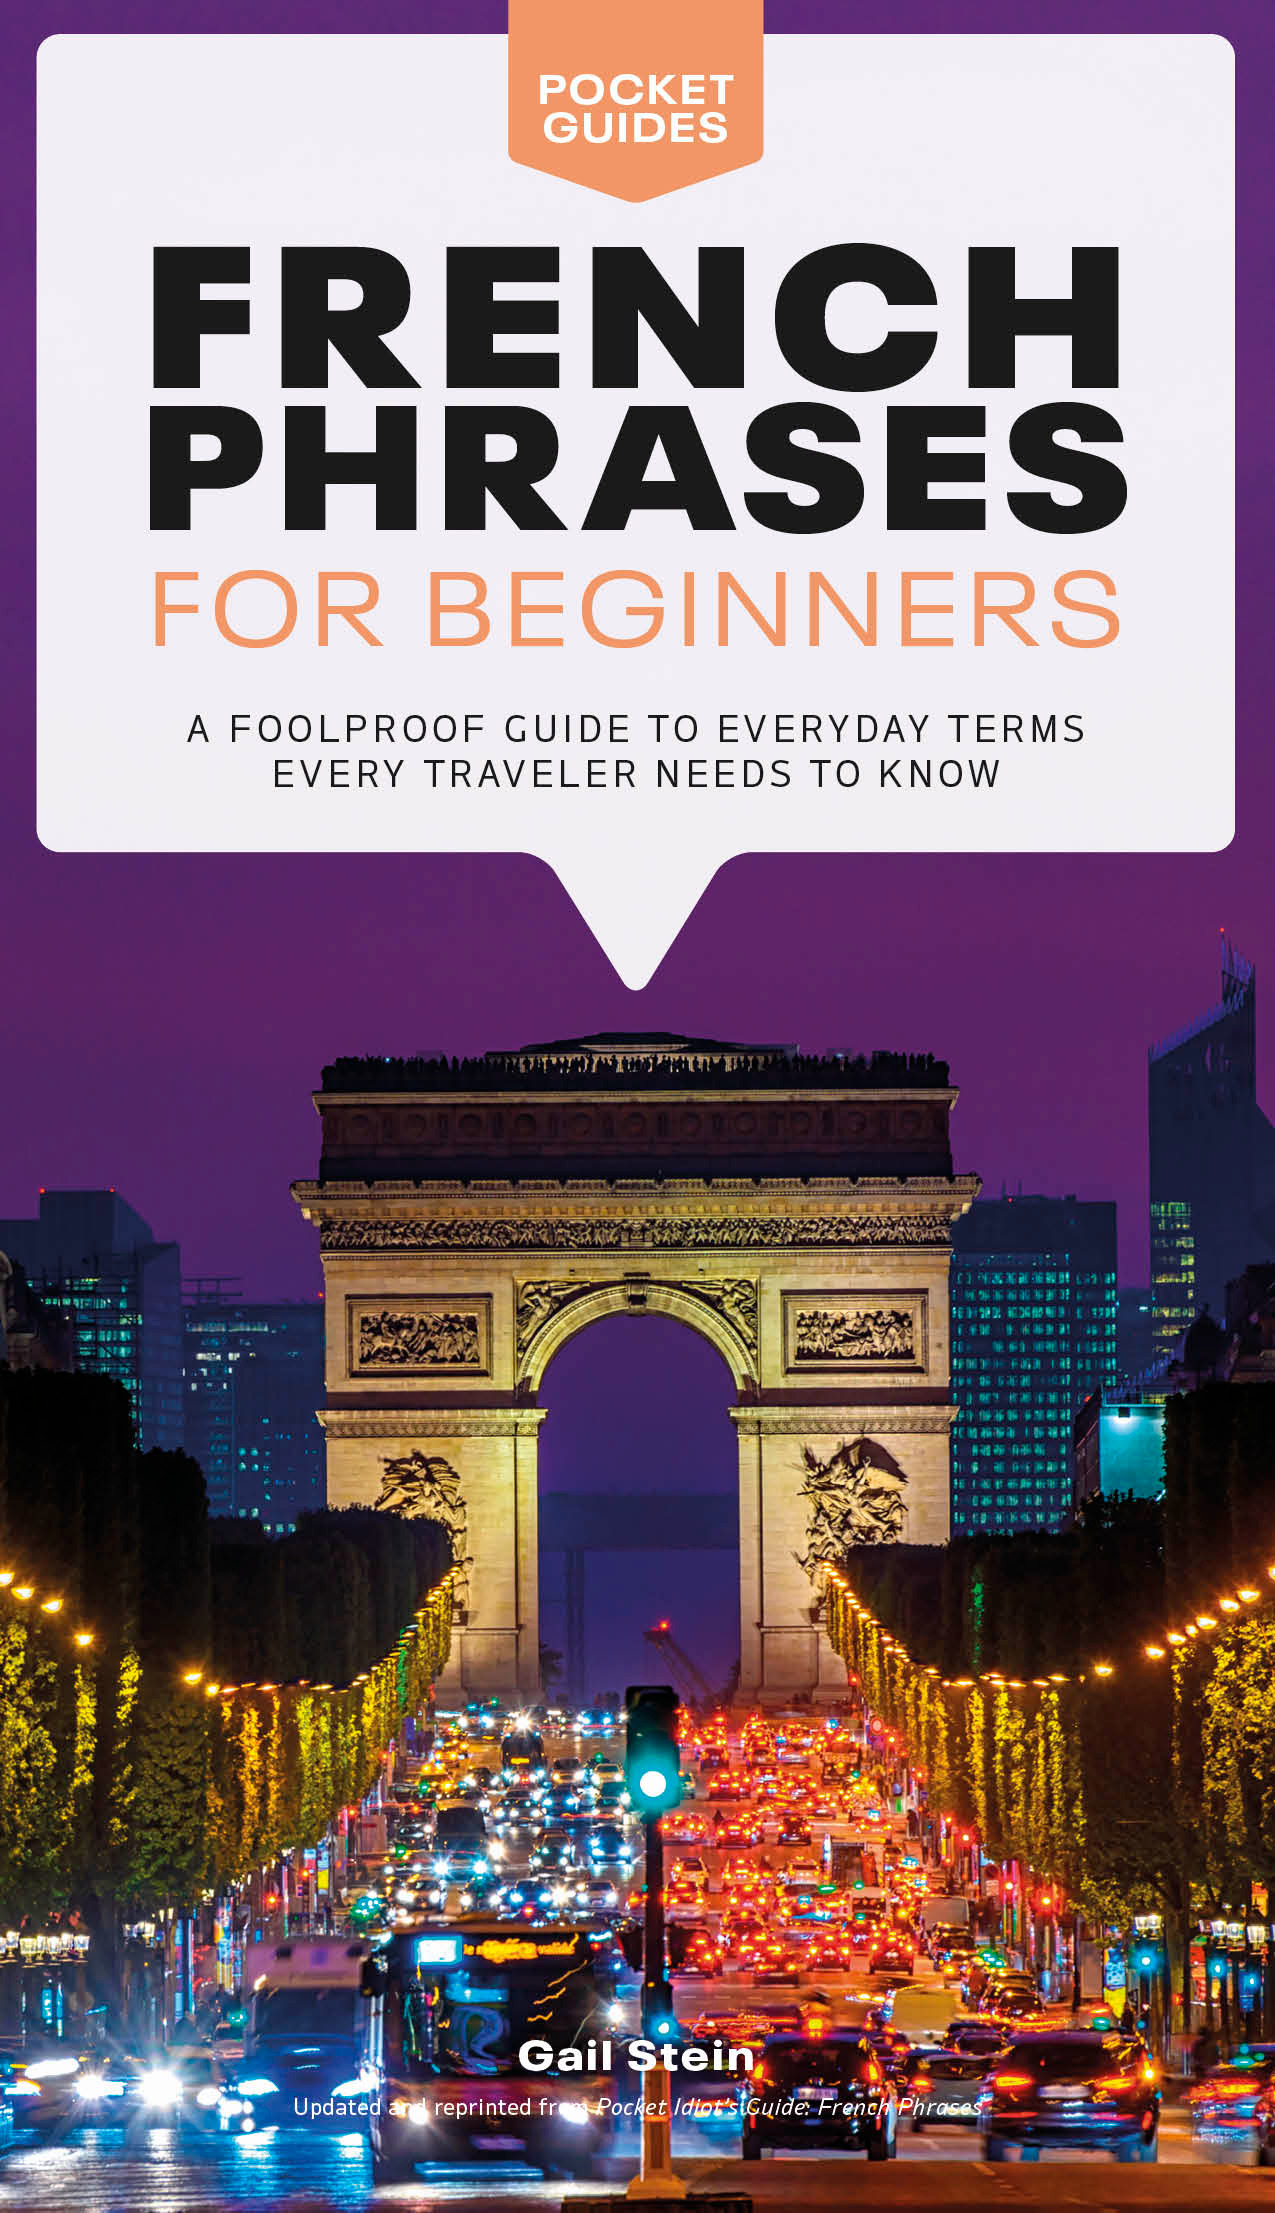 French Phrases for Beginners : A Foolproof Guide to Everyday Terms Every Traveler Needs to Know | Stein, Gail